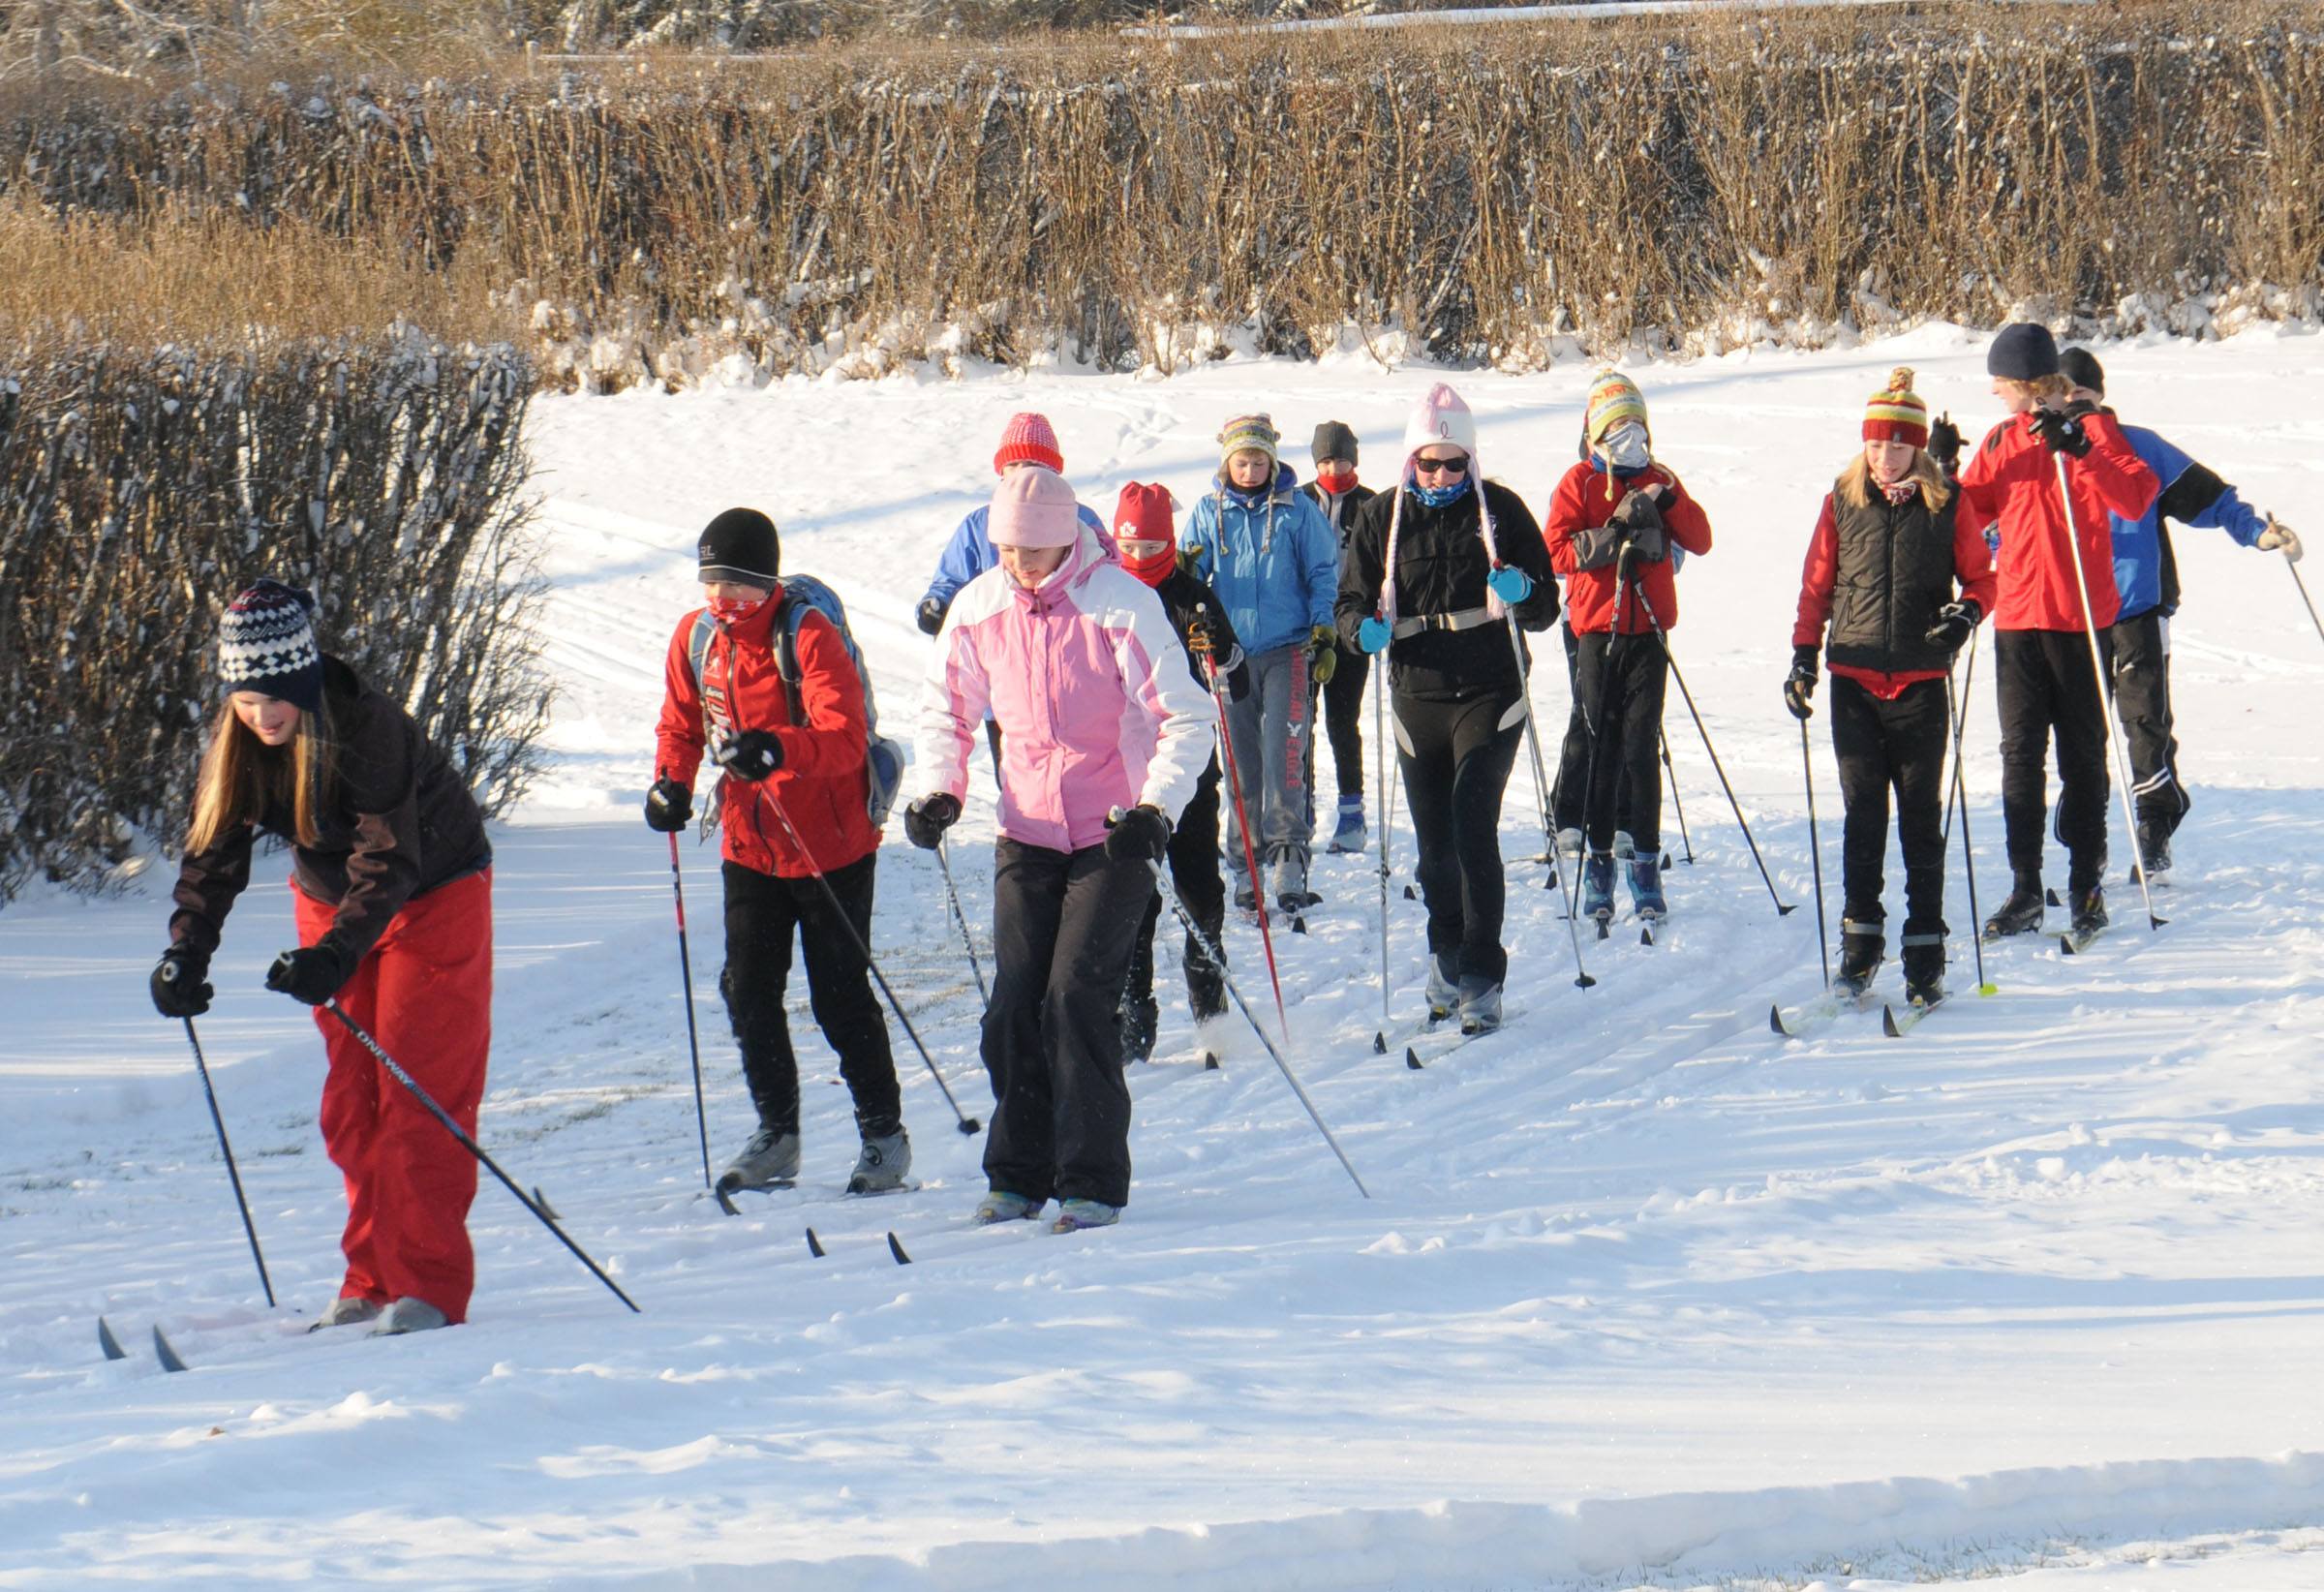 LOVING SNOW- Members of the Red Deer Nordic Ski Club took advantage of the early winter season at Bower Ponds Saturday morning to practice their cross country skiing skills as well as learn some new tricks from instructors.